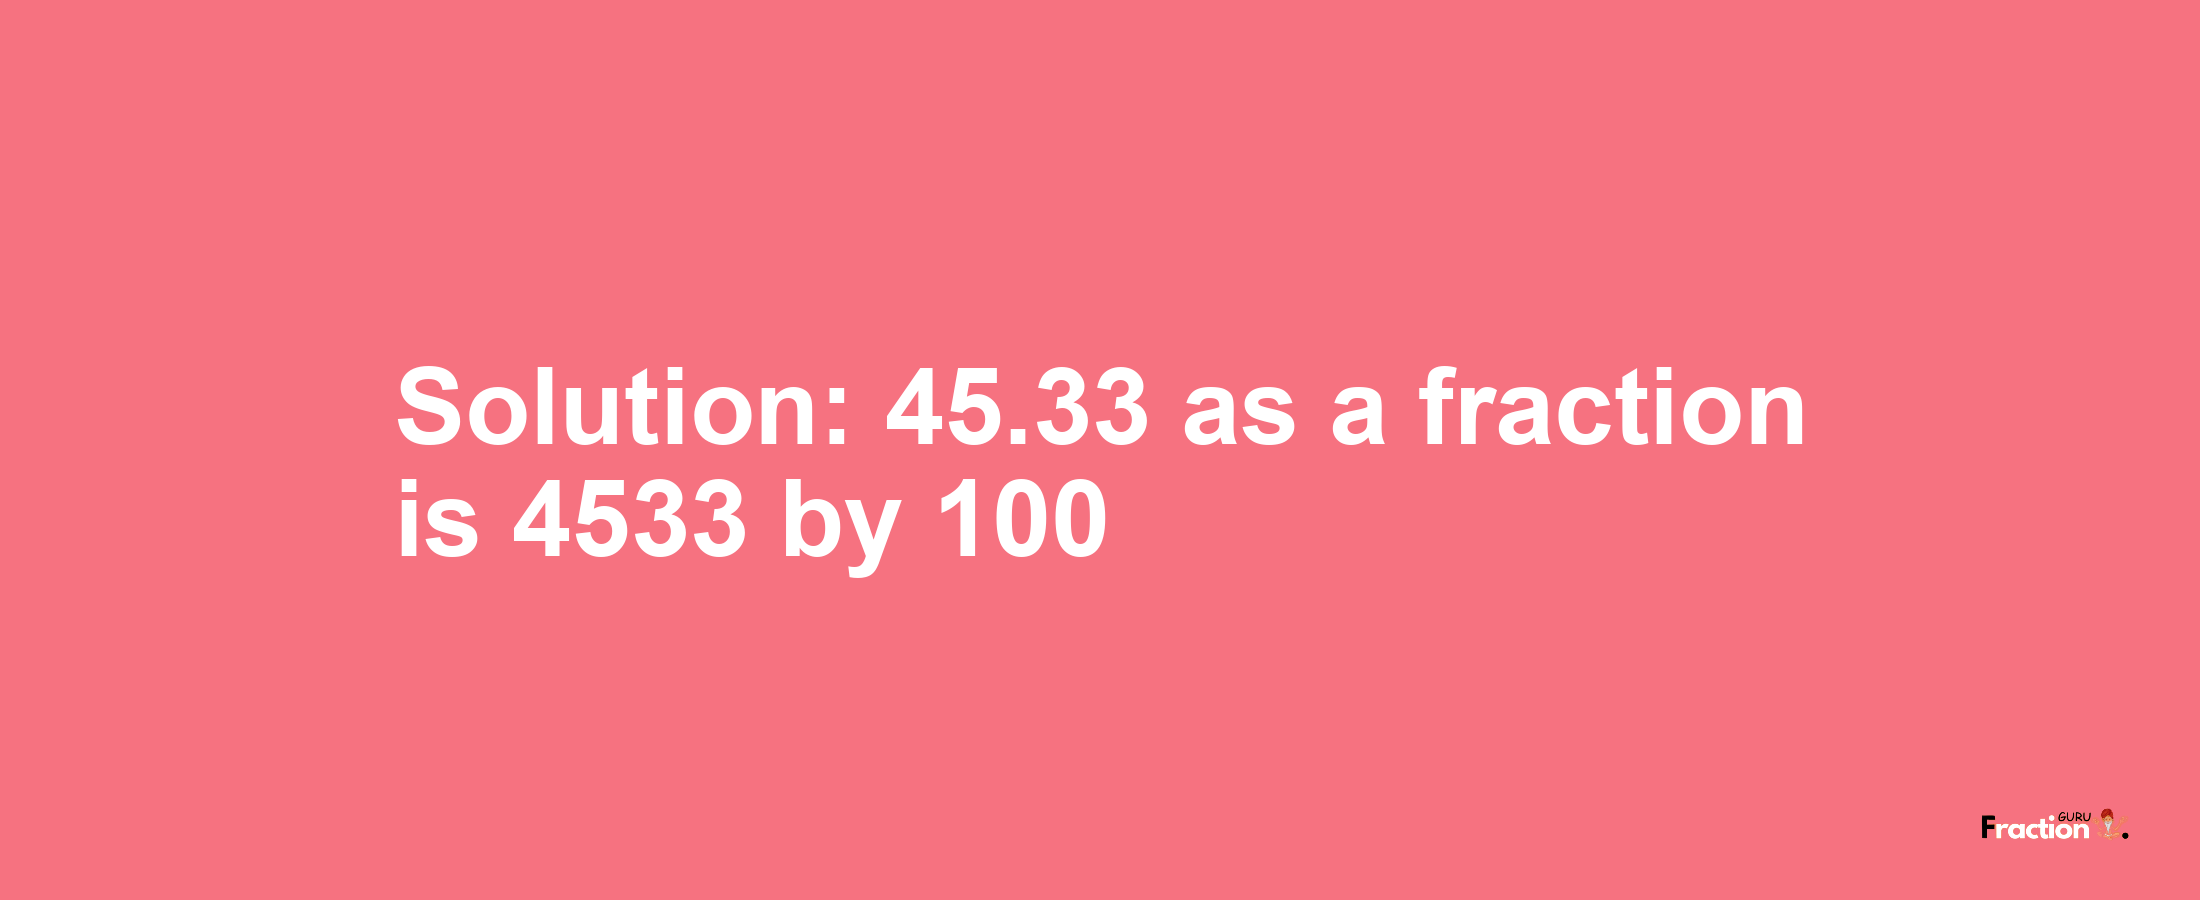 Solution:45.33 as a fraction is 4533/100